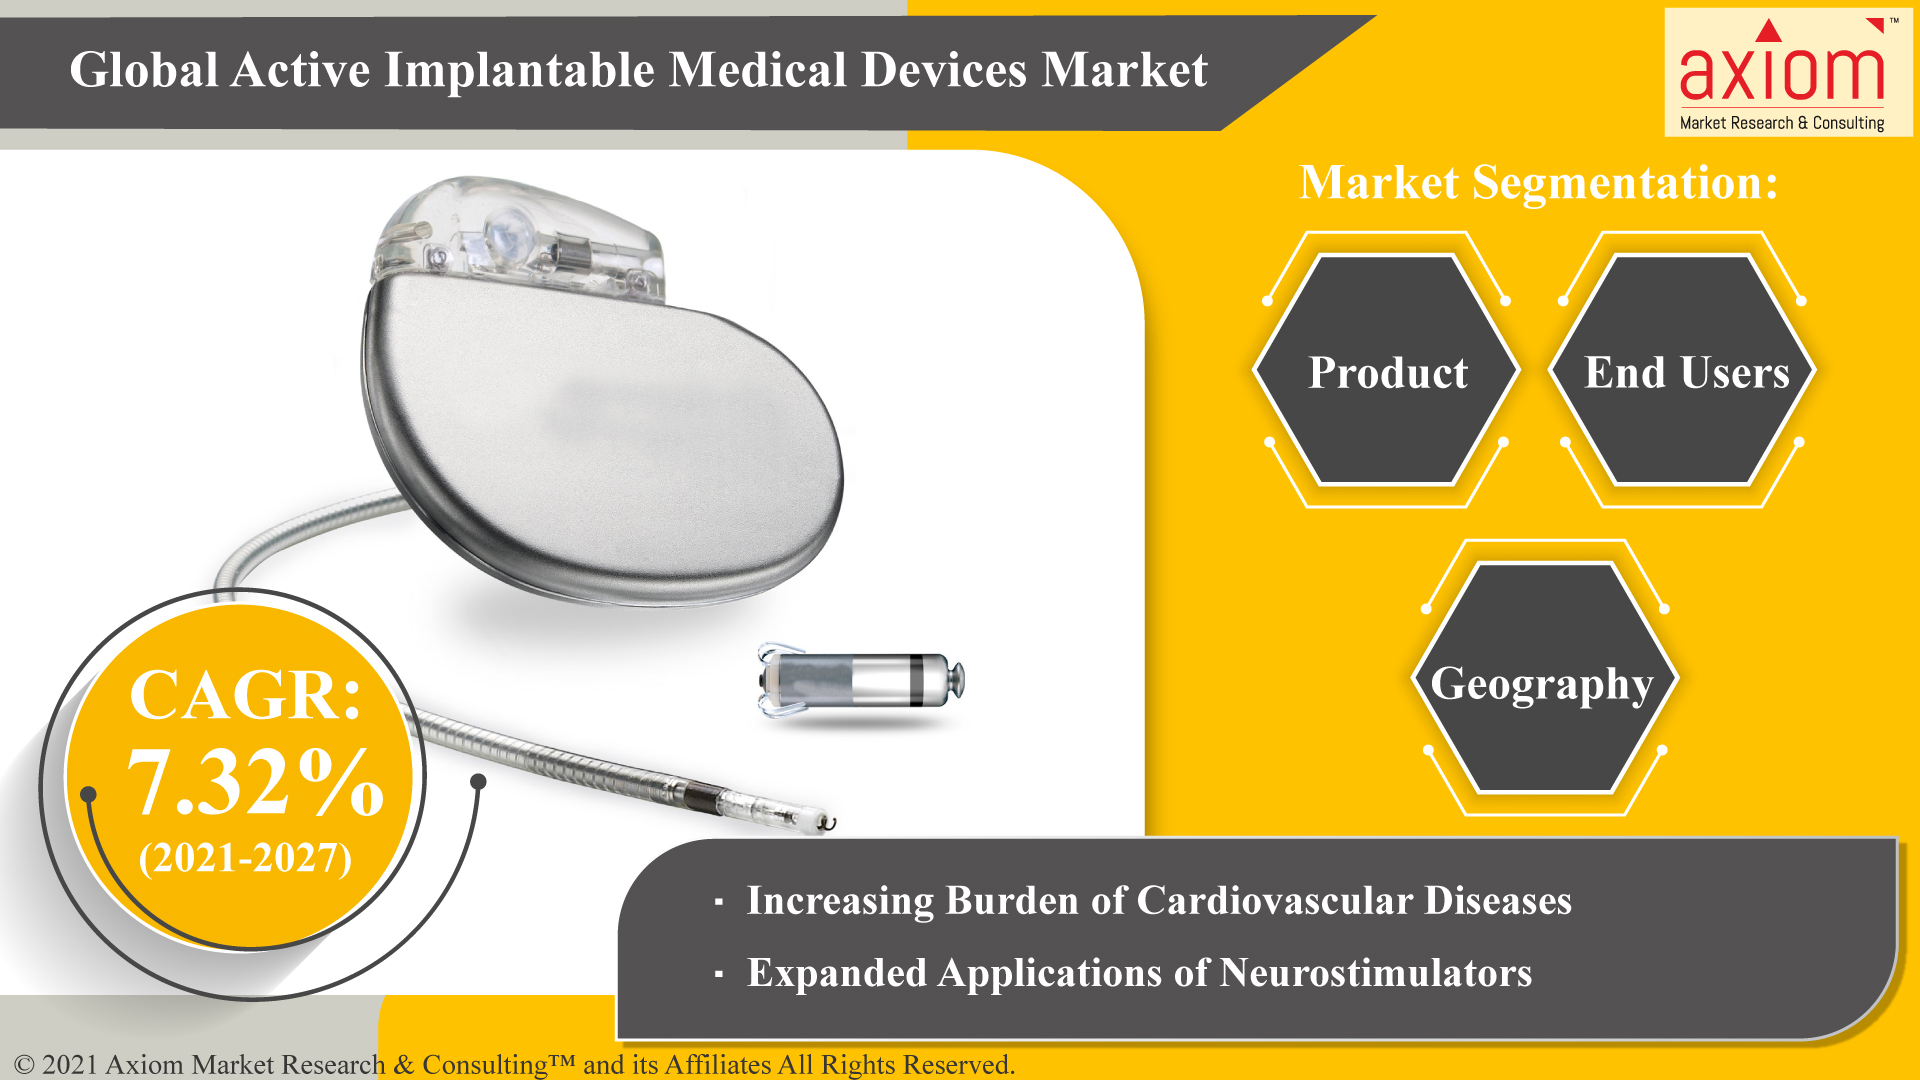 Global-Active-Implantable-Medical-Devices-Market_paid-pr